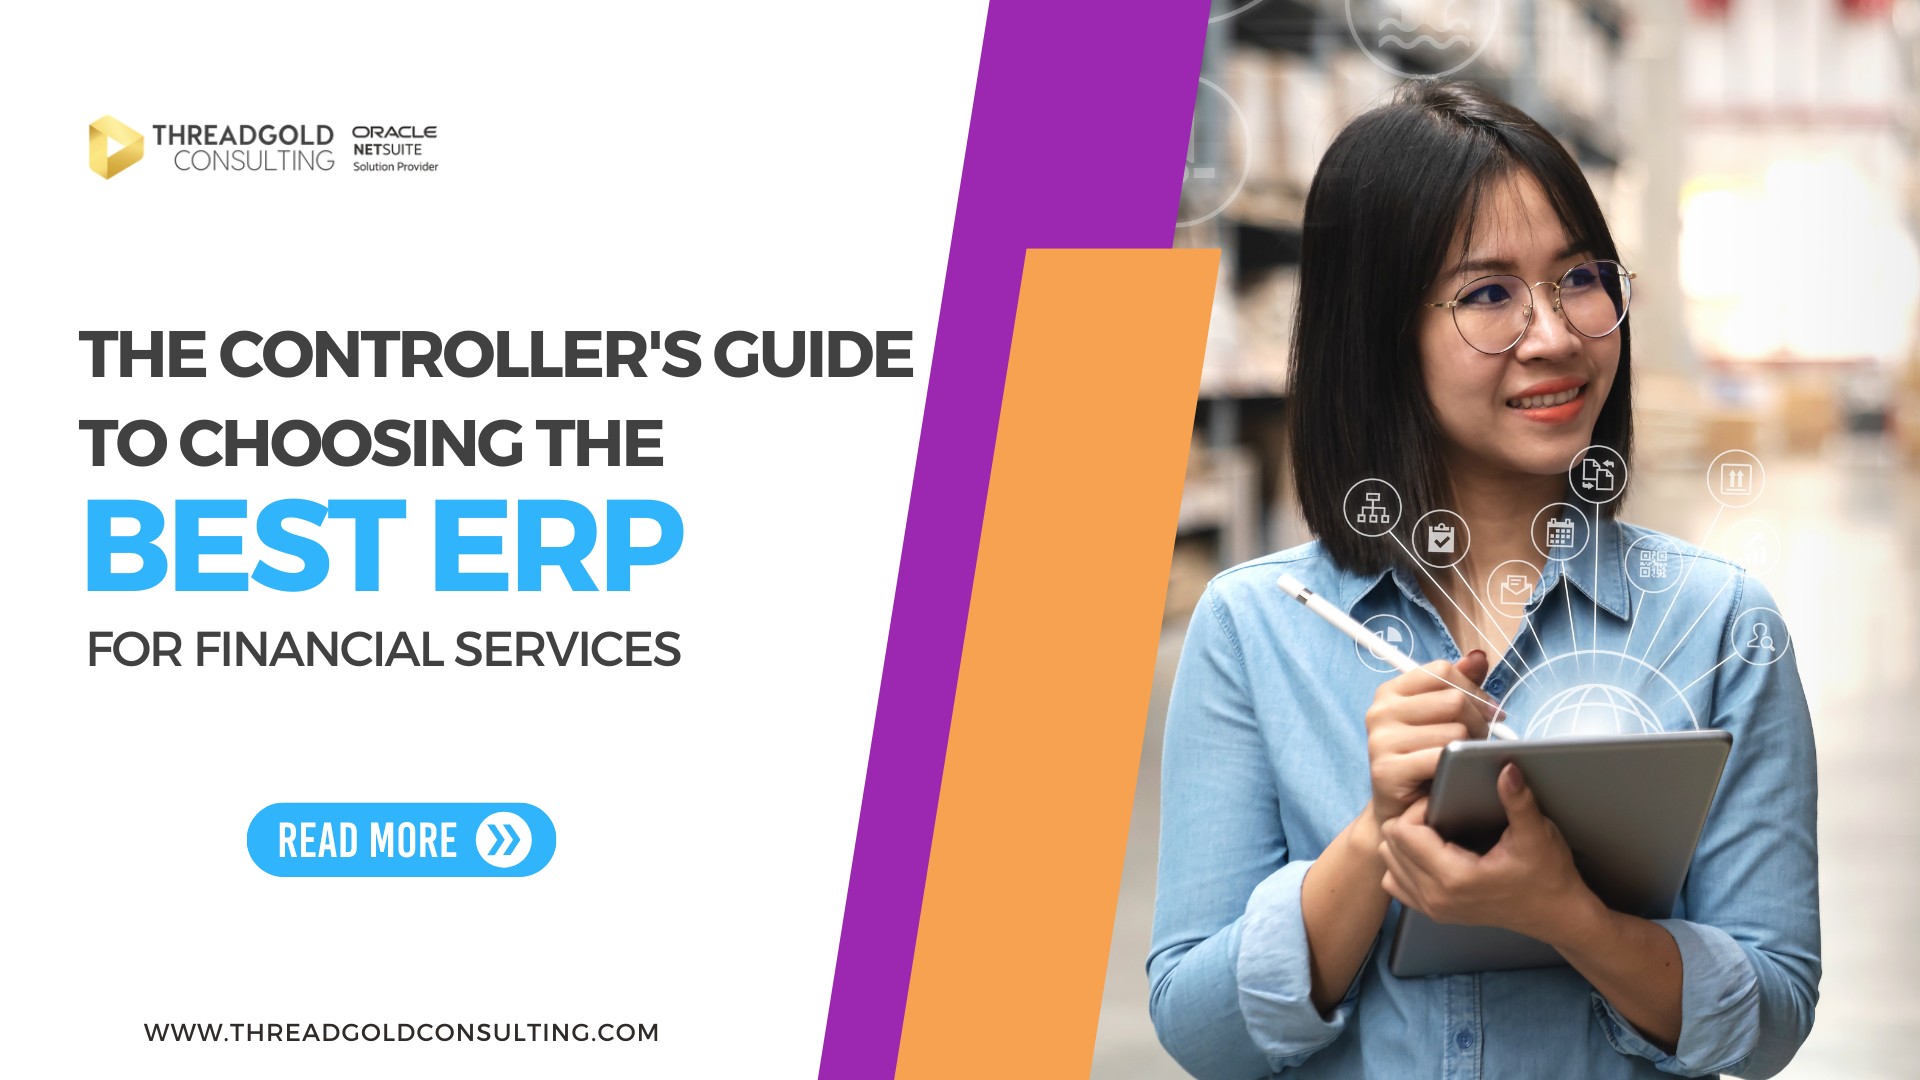 The Controller's Guide to Choosing the Best ERP for Financial Services